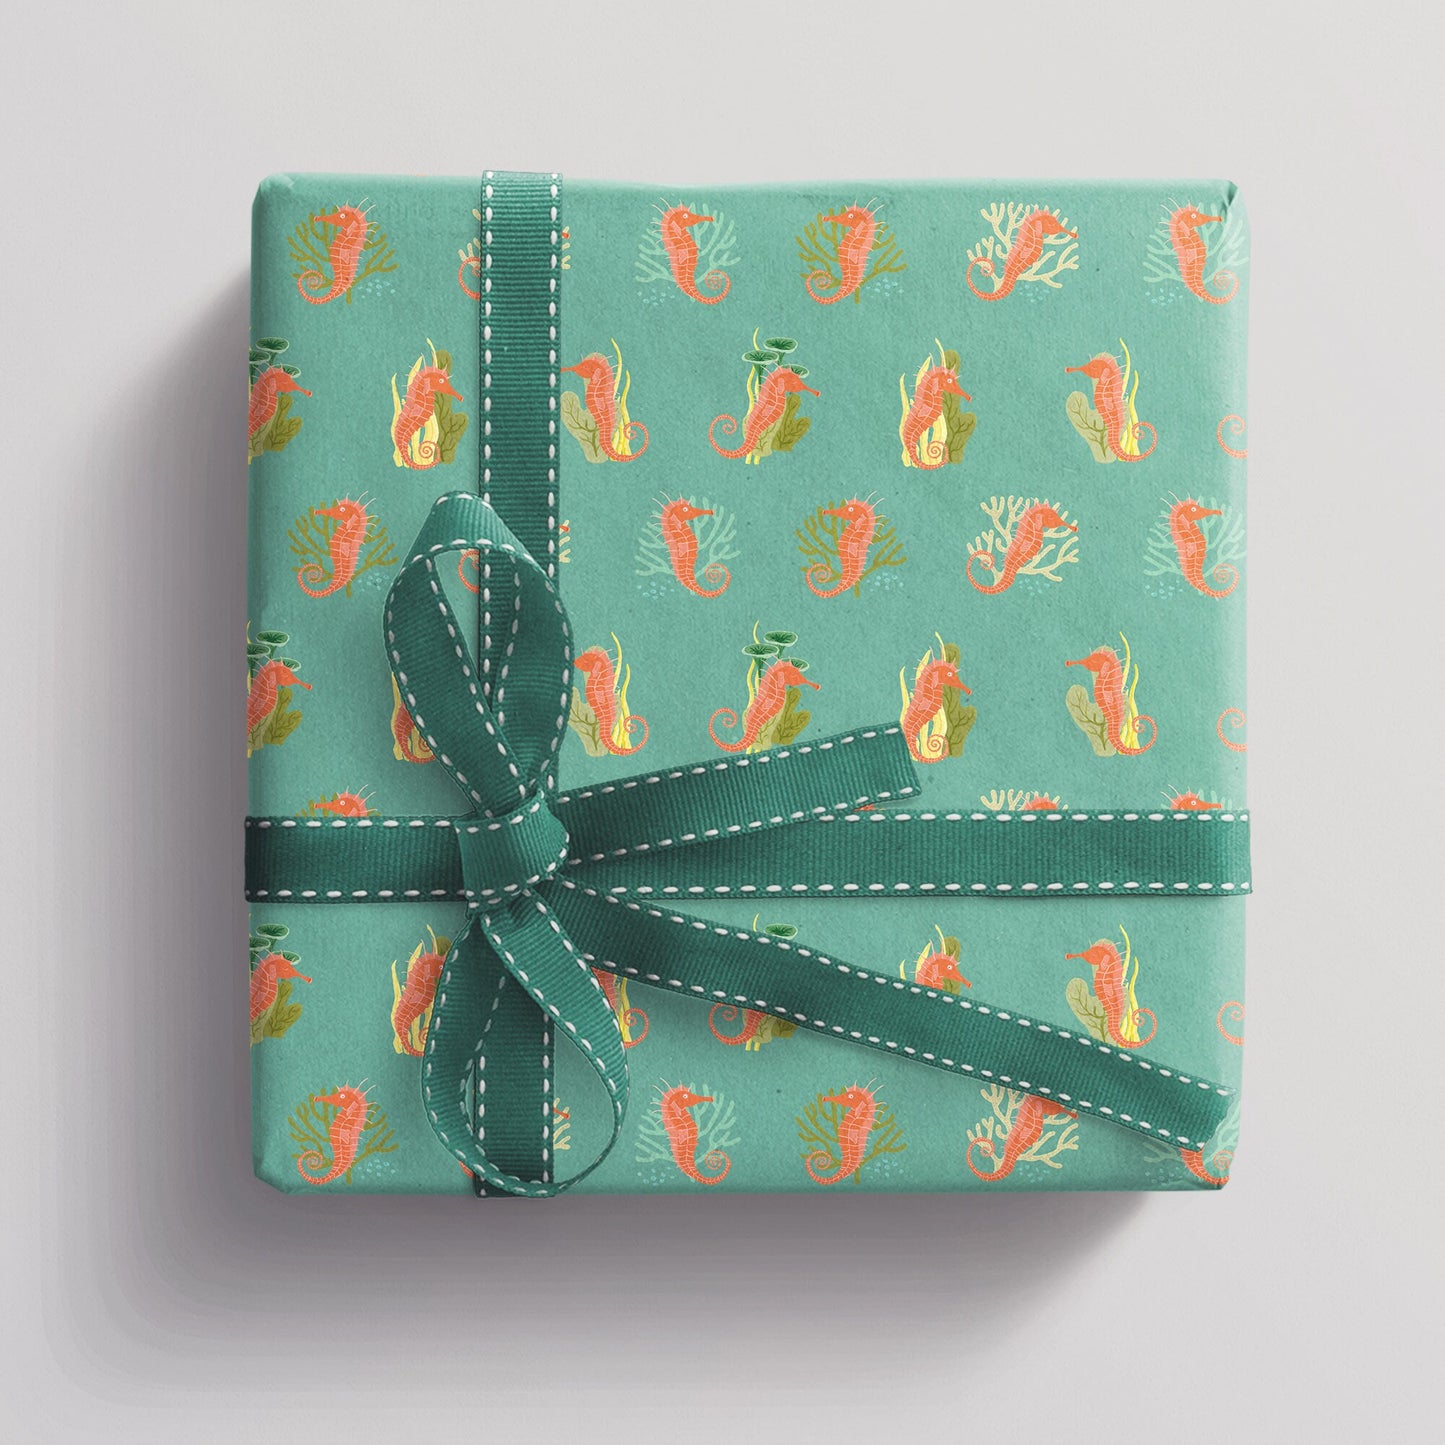 Wrapping paper 'Seahorse' 48x69cm turquoise